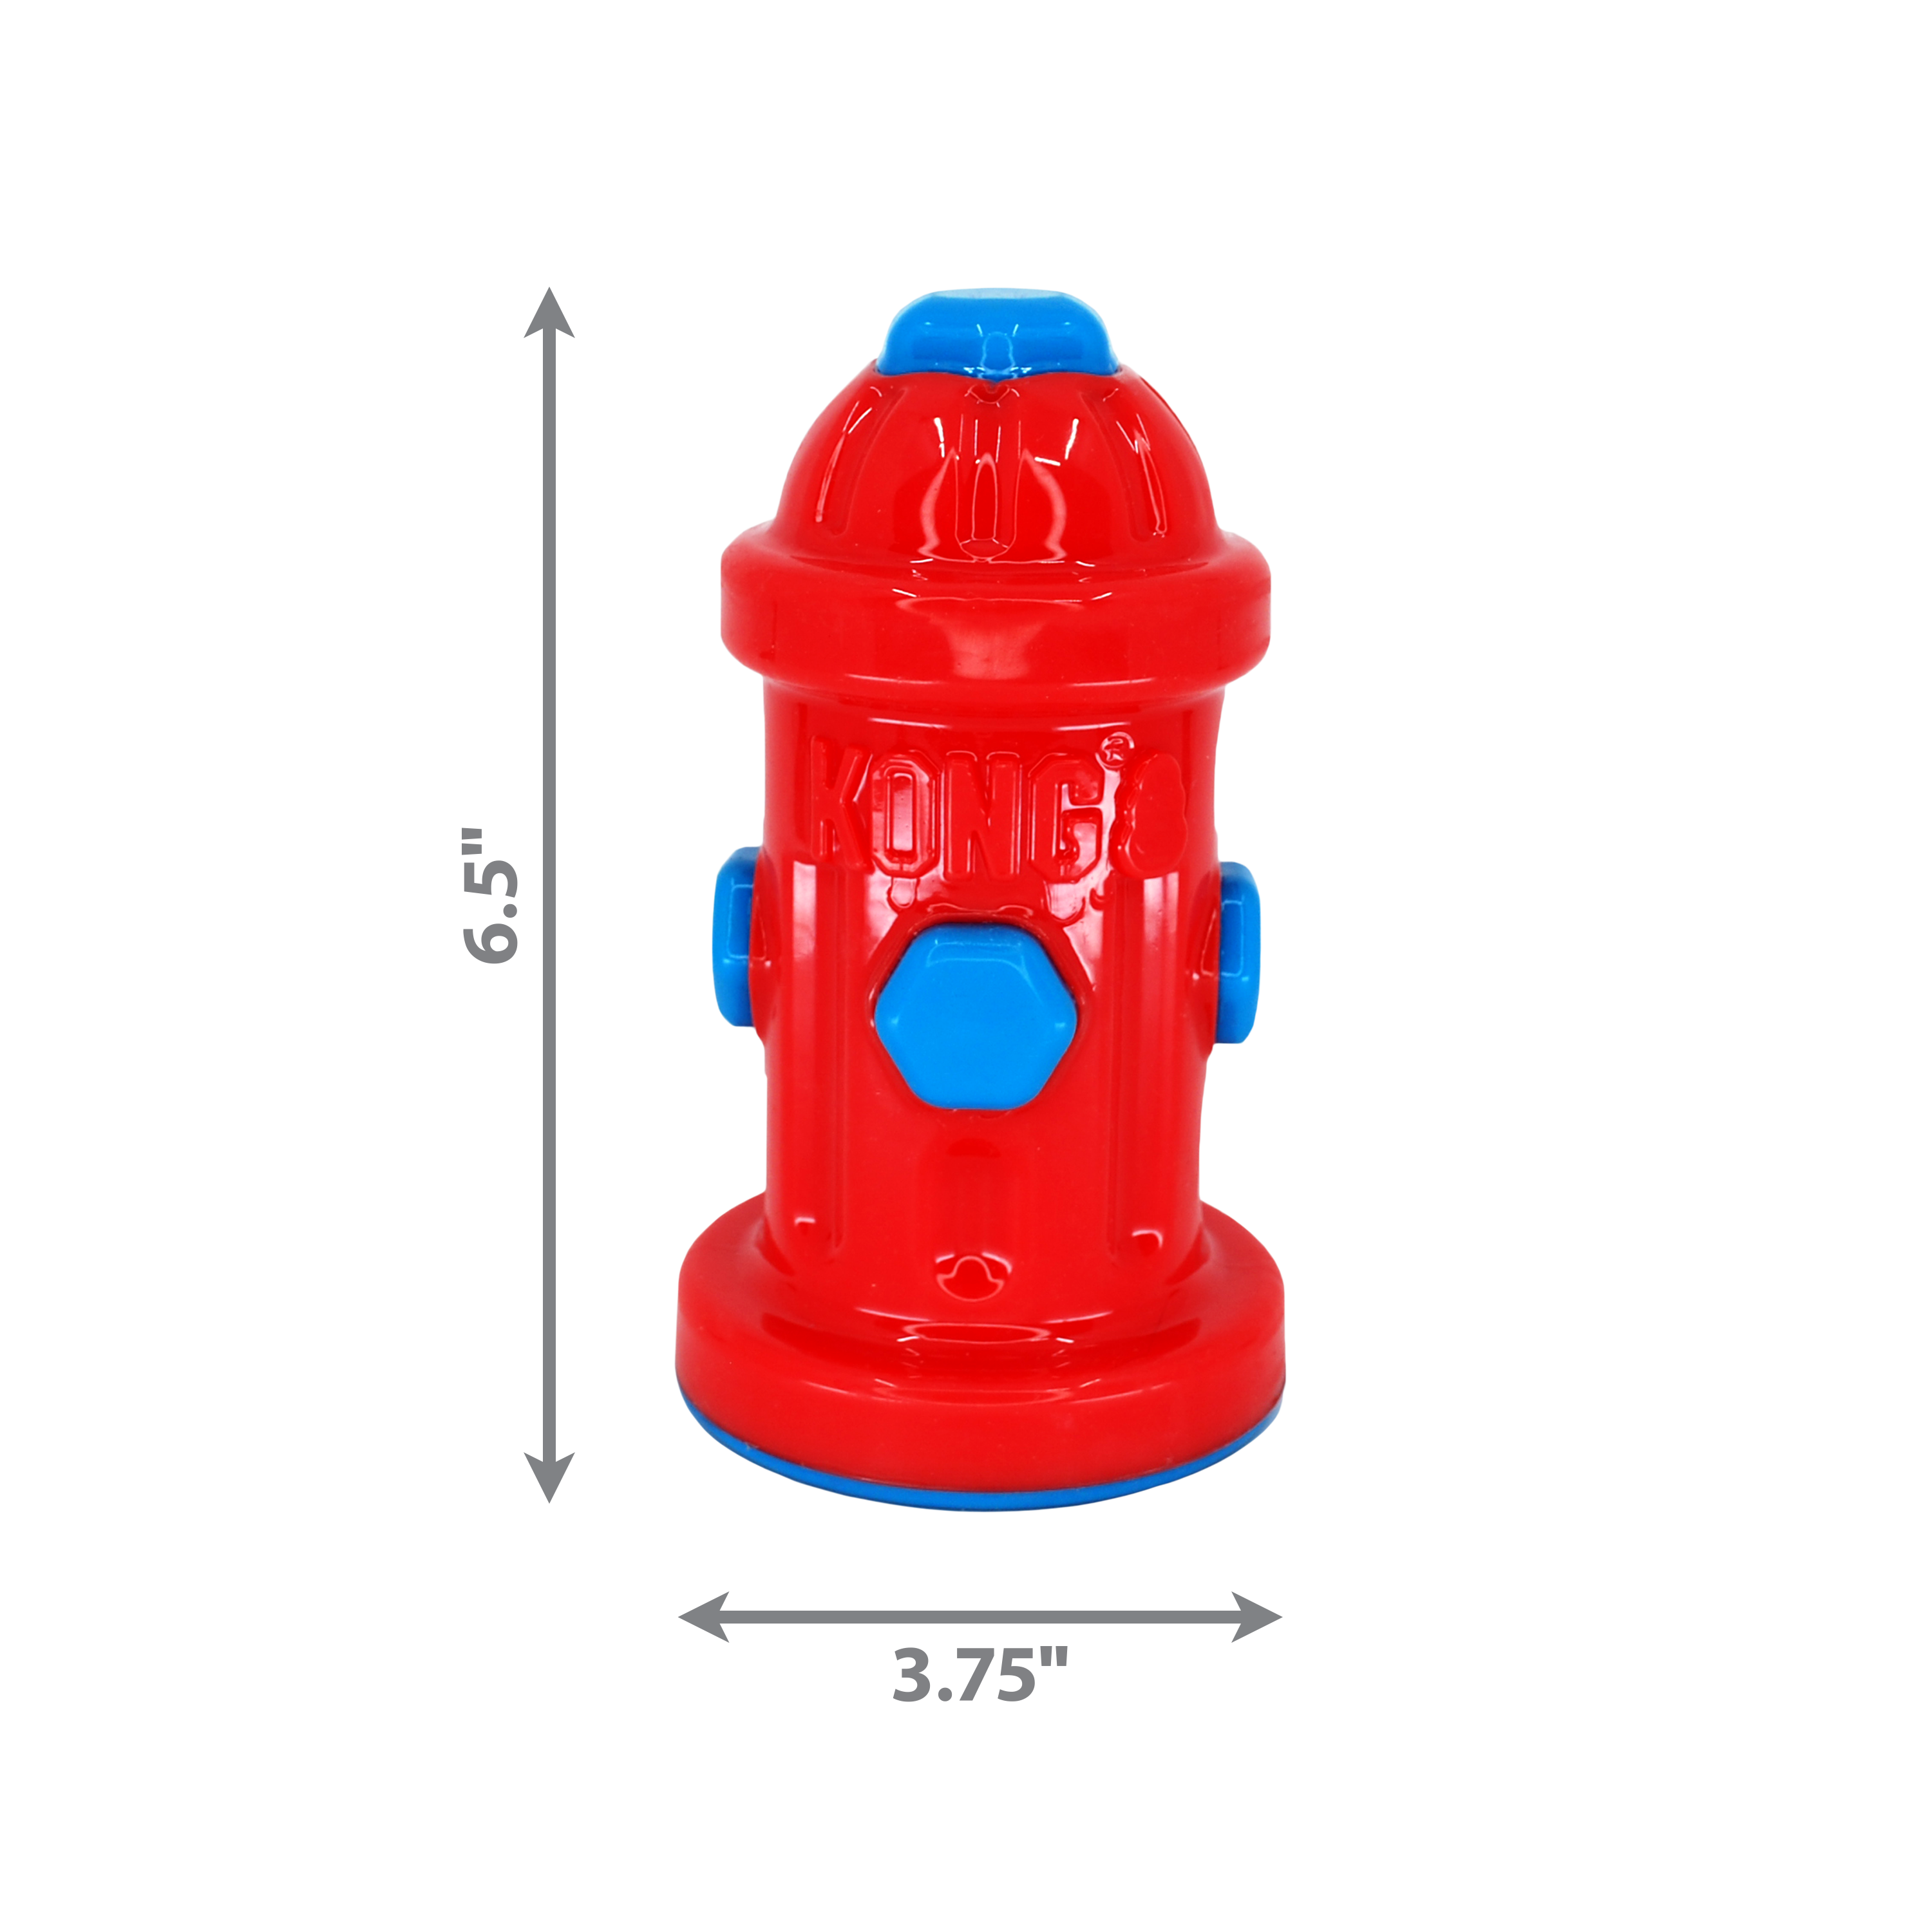 Eon Fire Hydrant dimoffpack product image